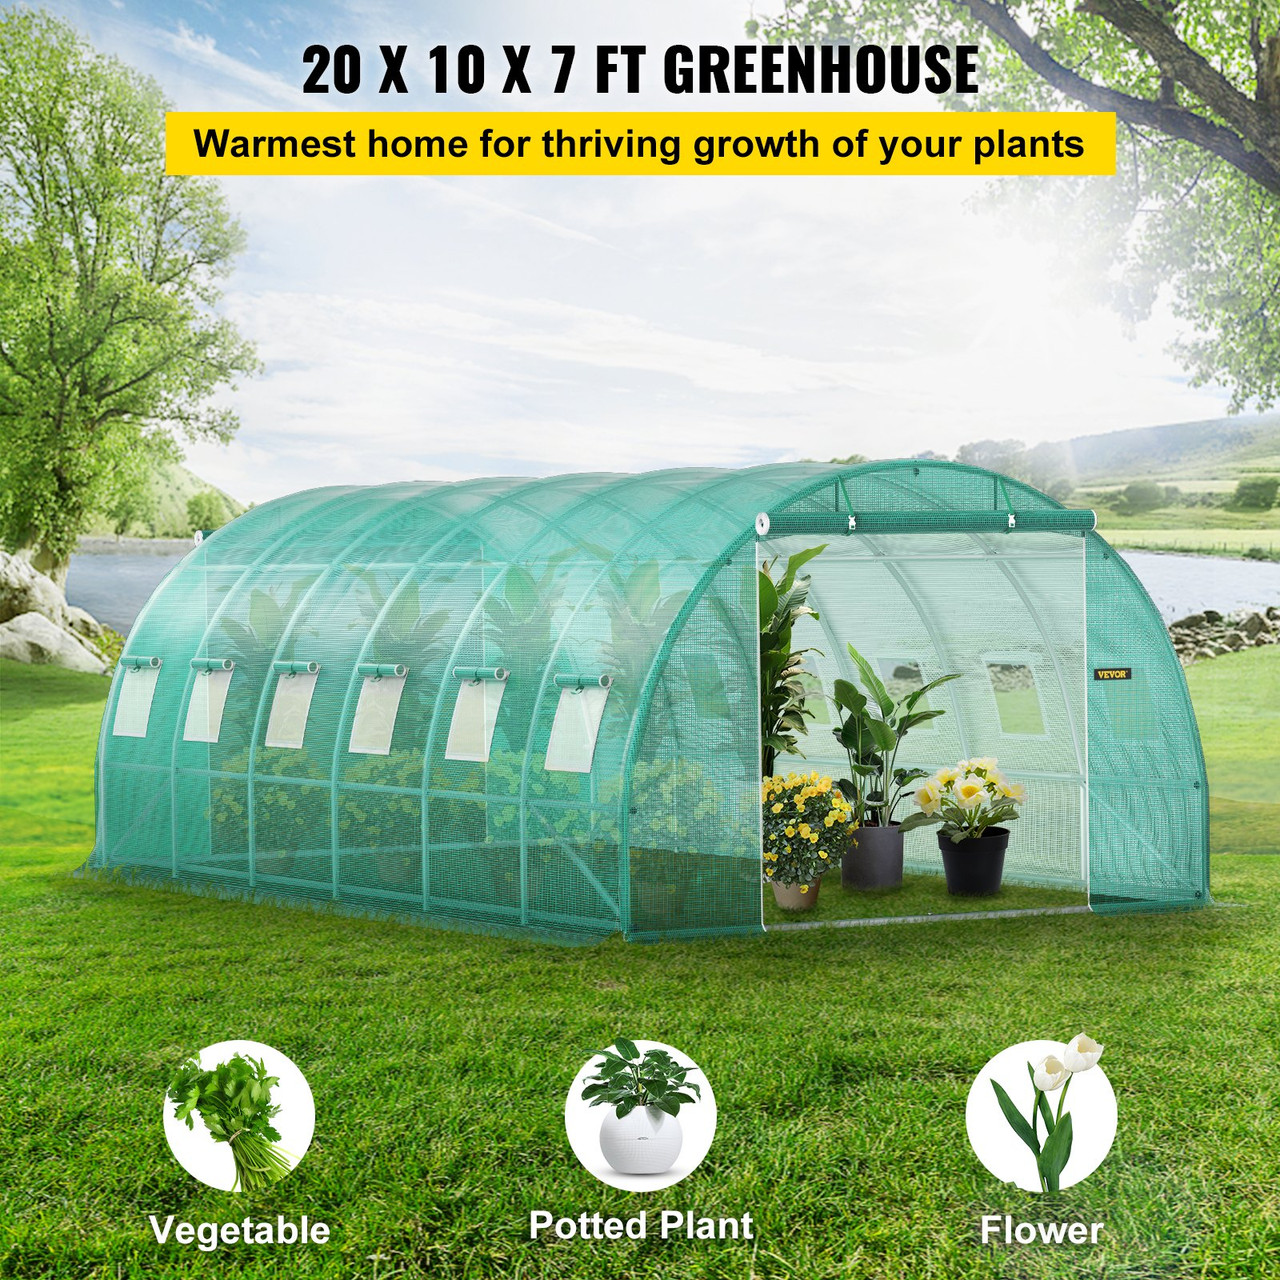 Walk-in Tunnel Greenhouse, 20 x 10 x 7 ft Portable Plant Hot House w/ Galvanized Steel Hoops, 3 Top Beams, Diagonal Poles, 2 Zippered Doors & 12